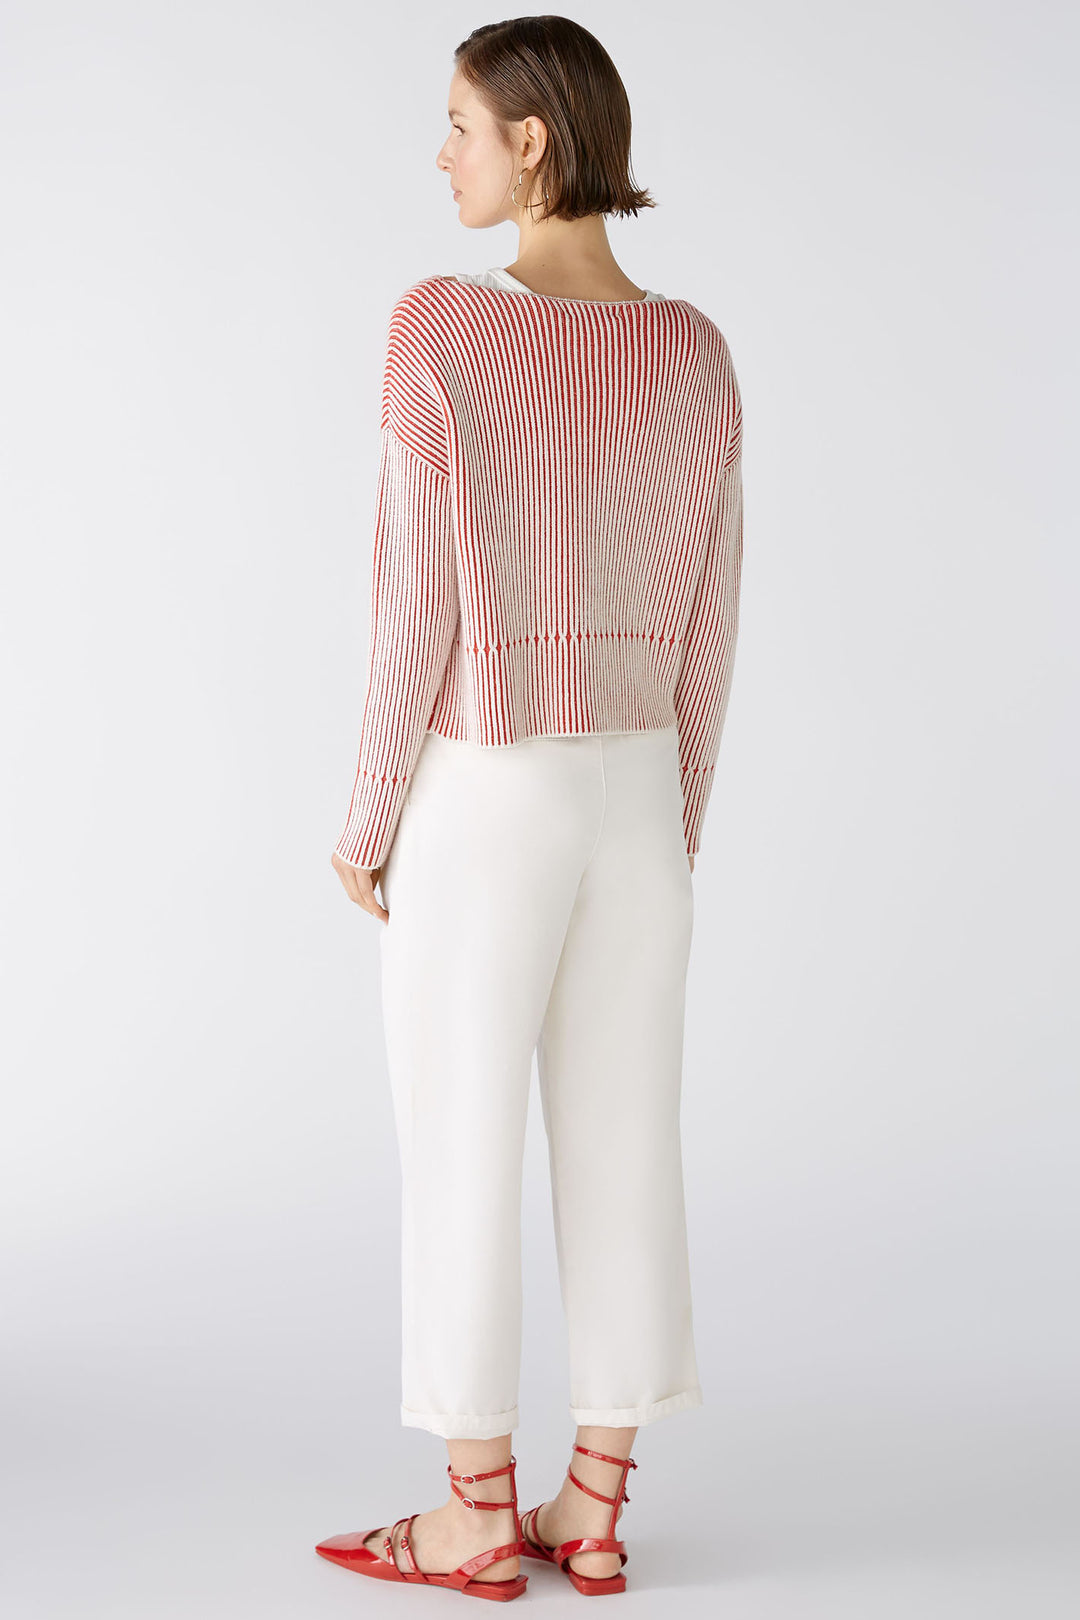 Oui 86626 Red White Wide Neck Ribbed Jumper - Olivia Grace Fashion